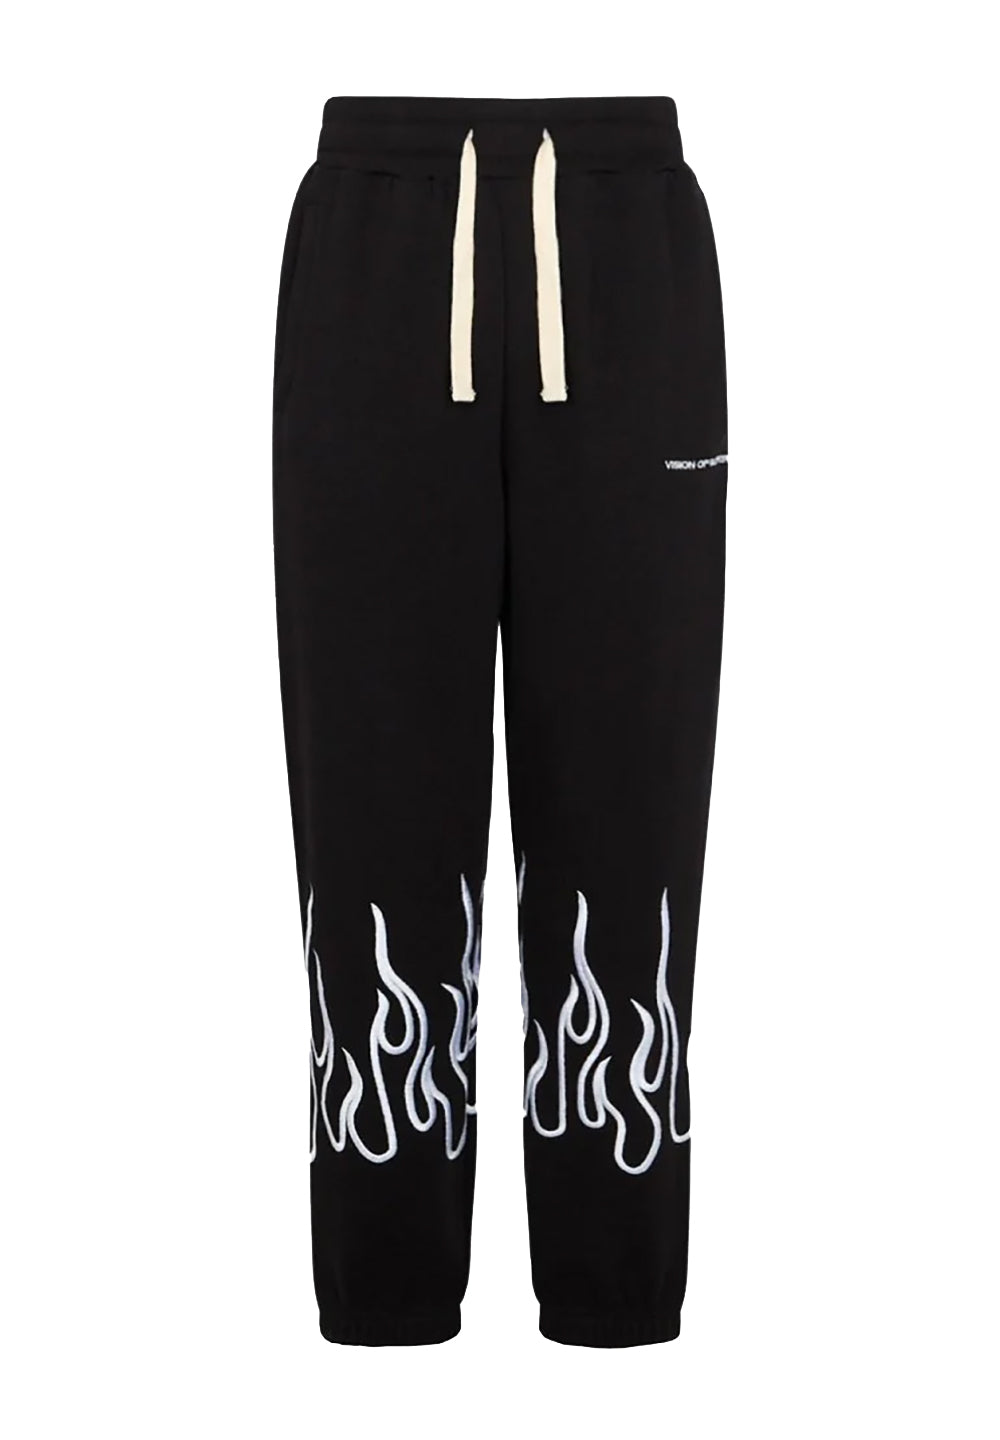 Pants with White Embroidered Flames